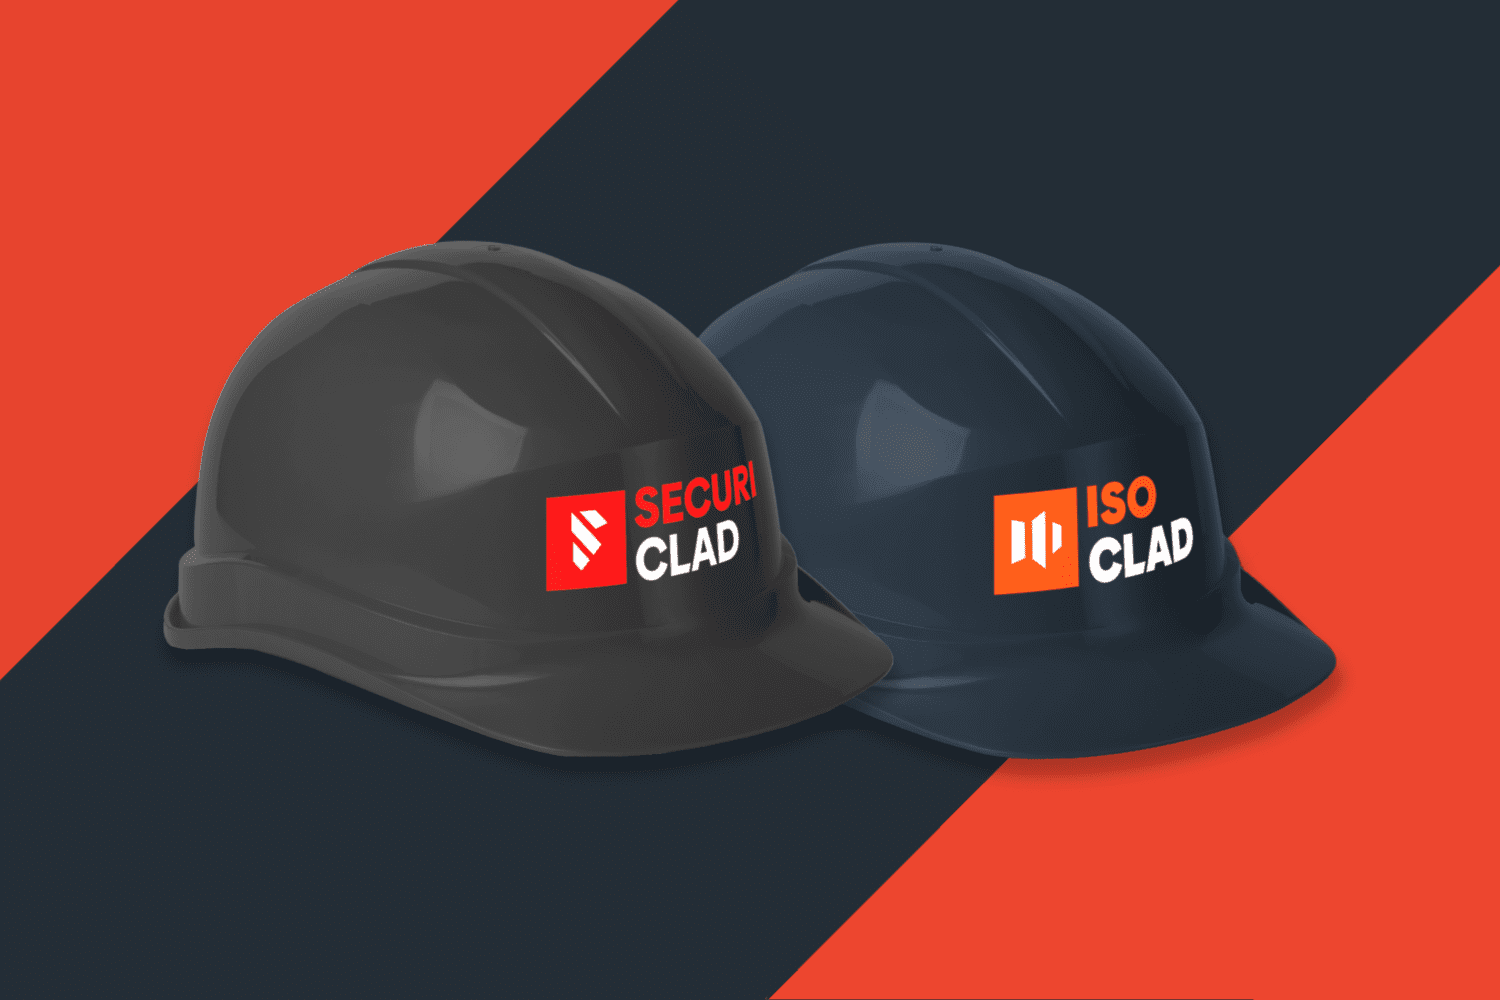 Securiclad refreshes with new modern brand update in 2021